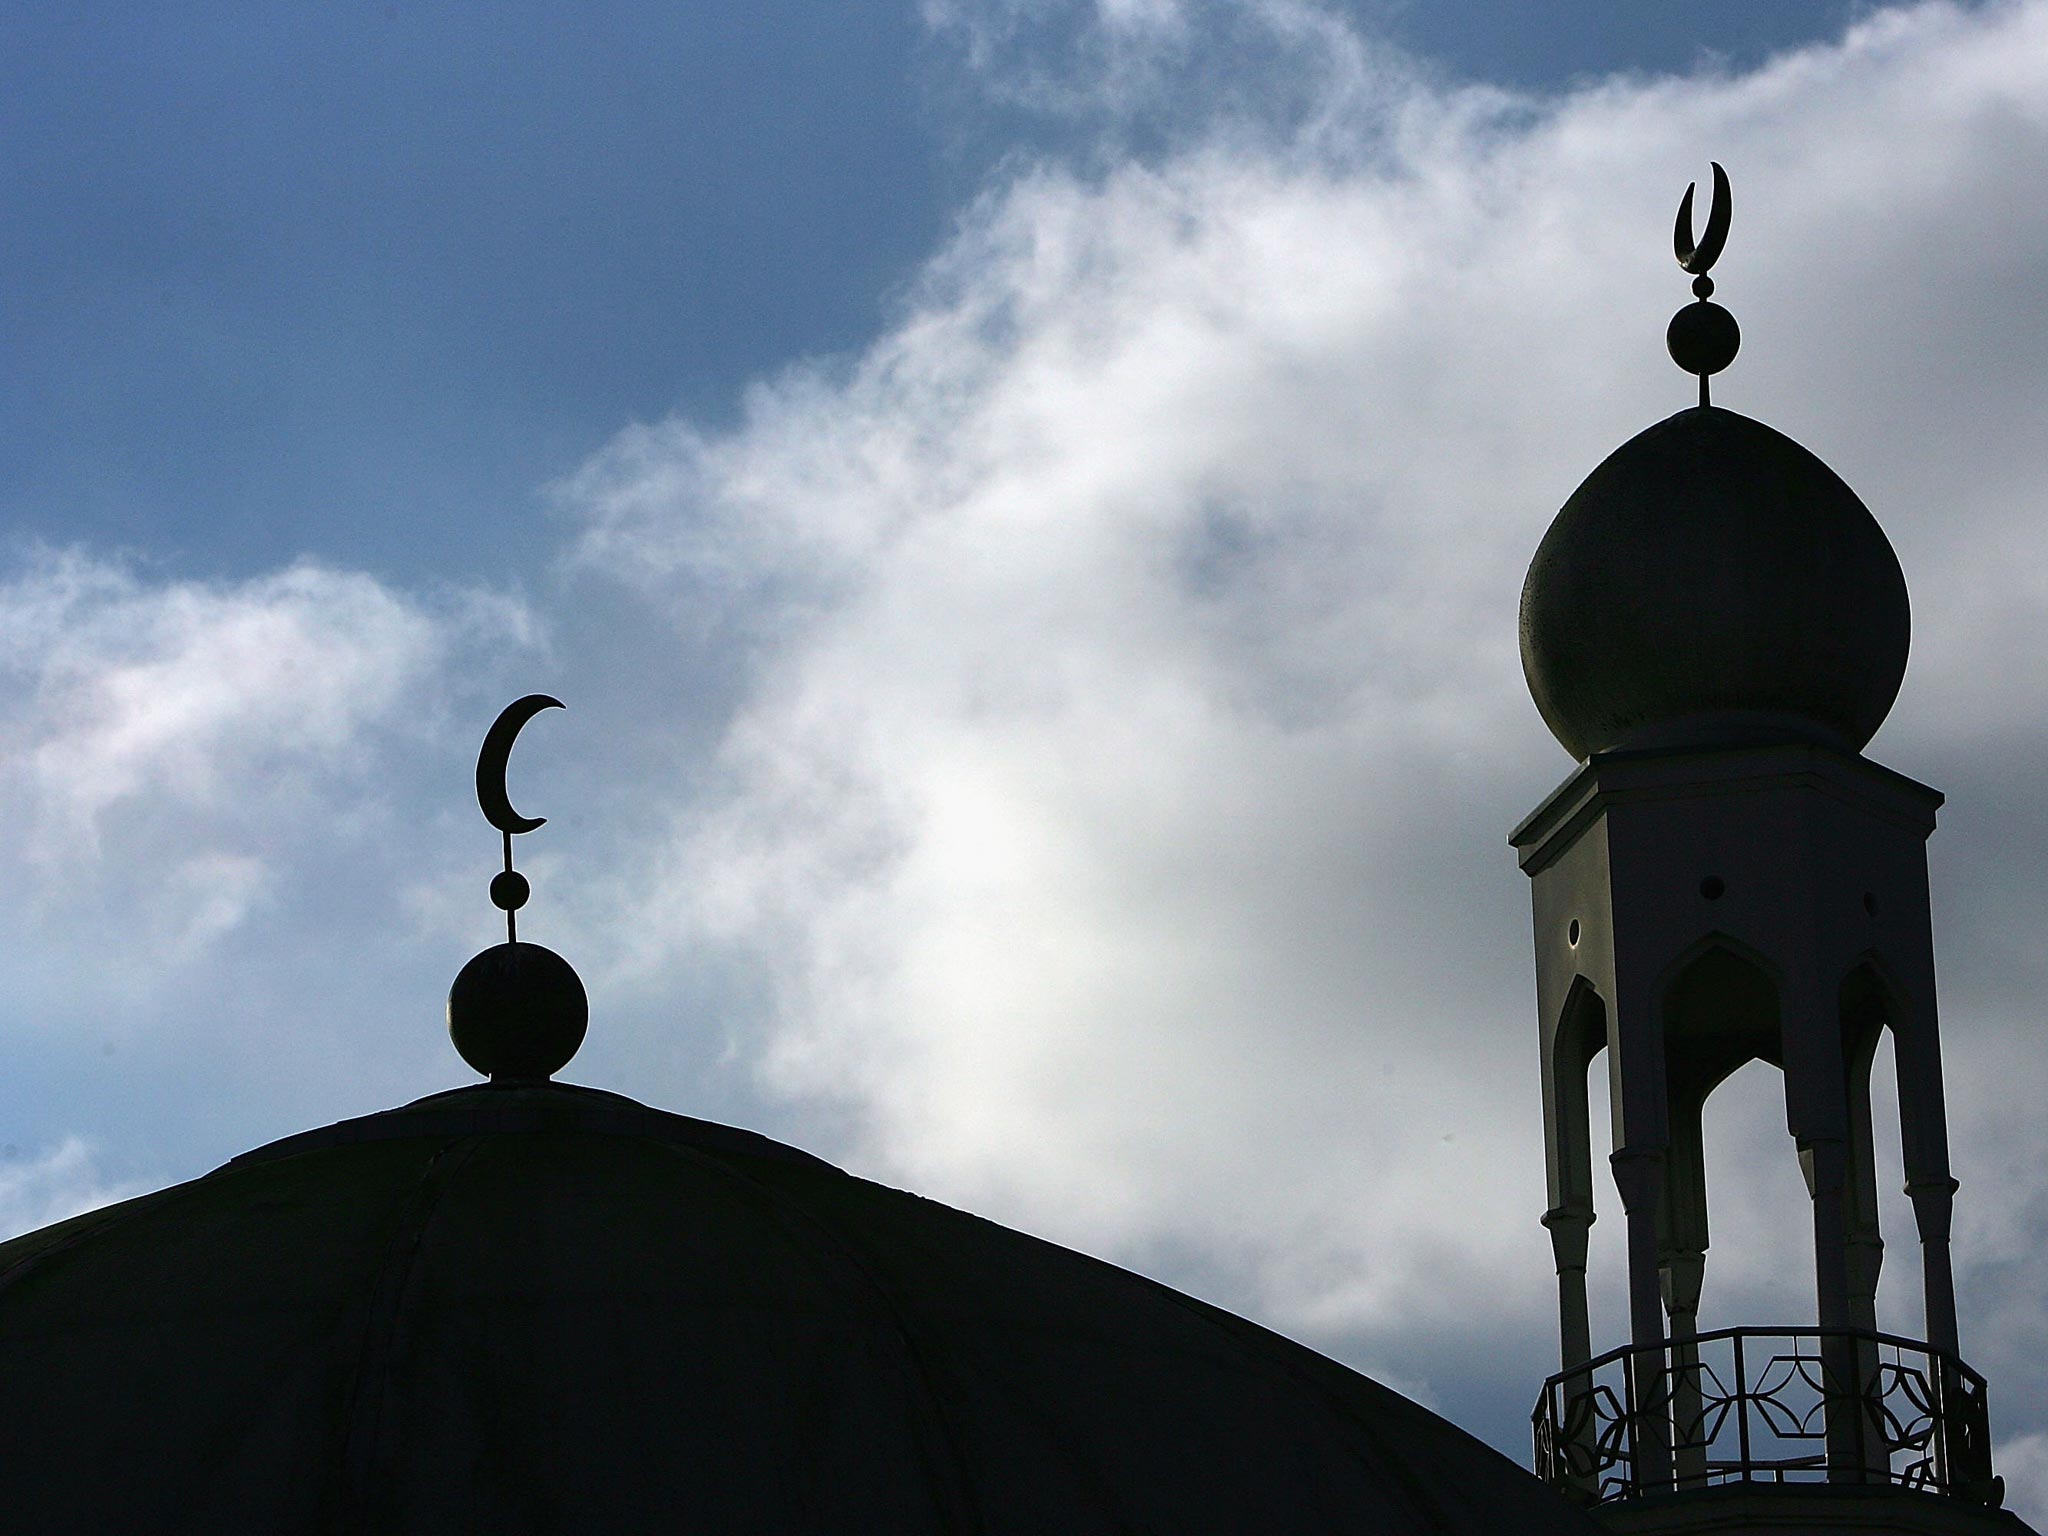 The debate was due to take place at Birmingham Central Mosque